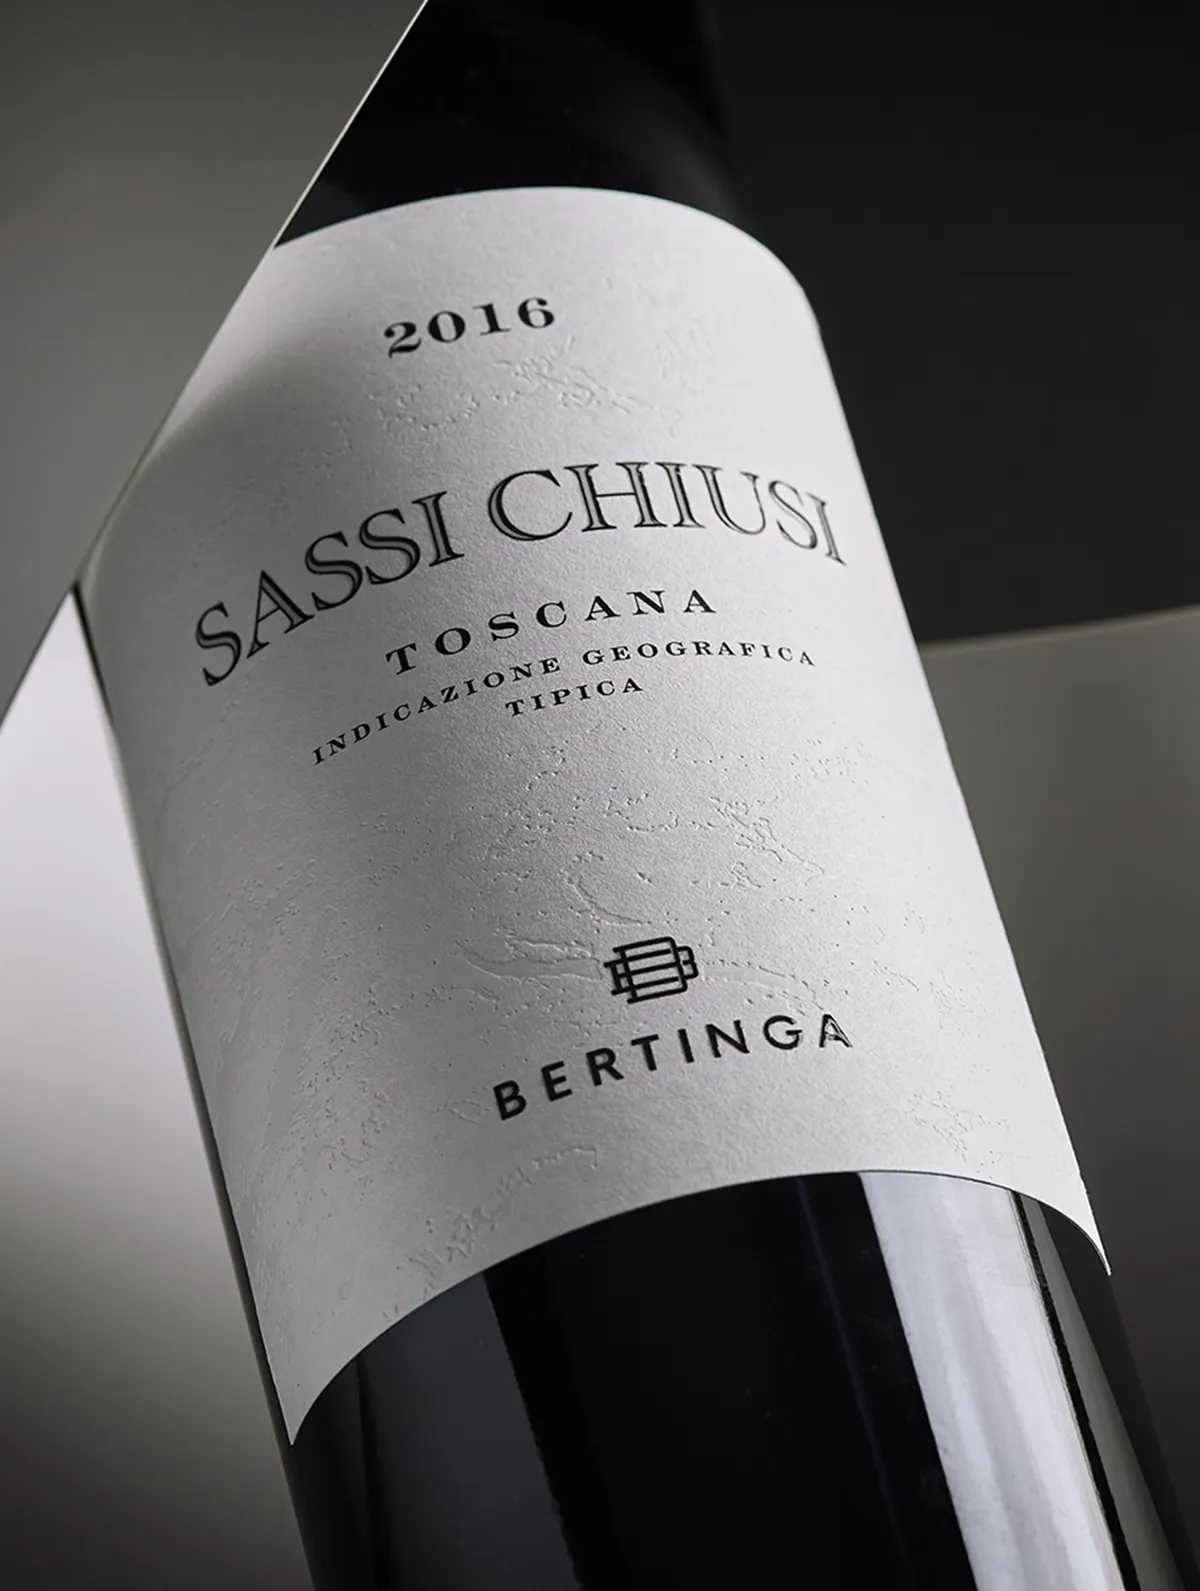 Bertinga - We designed the best labels. Real tuscan wine. - By HDG